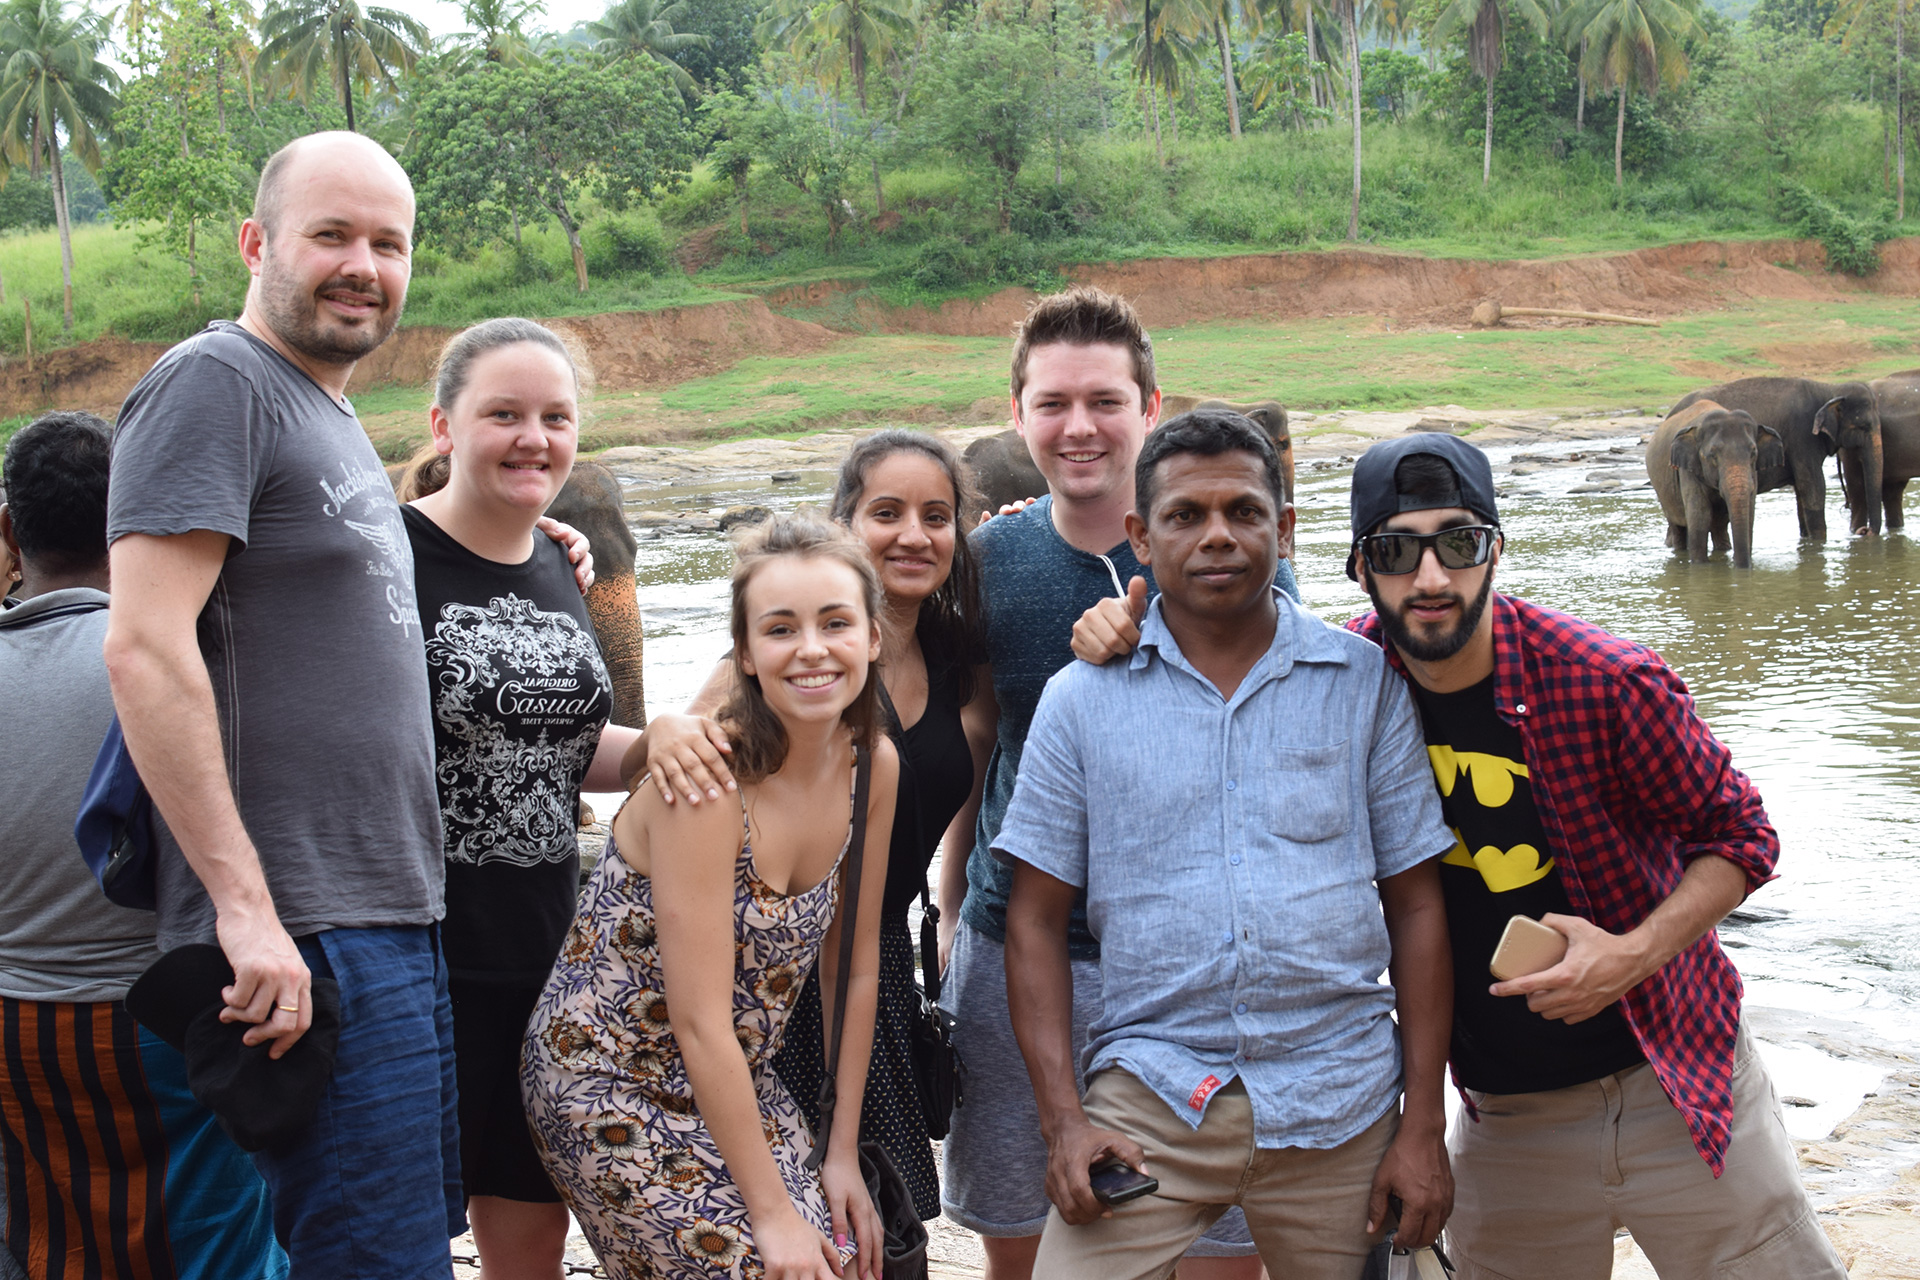 Come face to face with huge elephants in Sri Lanka during a 2 week group trip with VoluntEars 